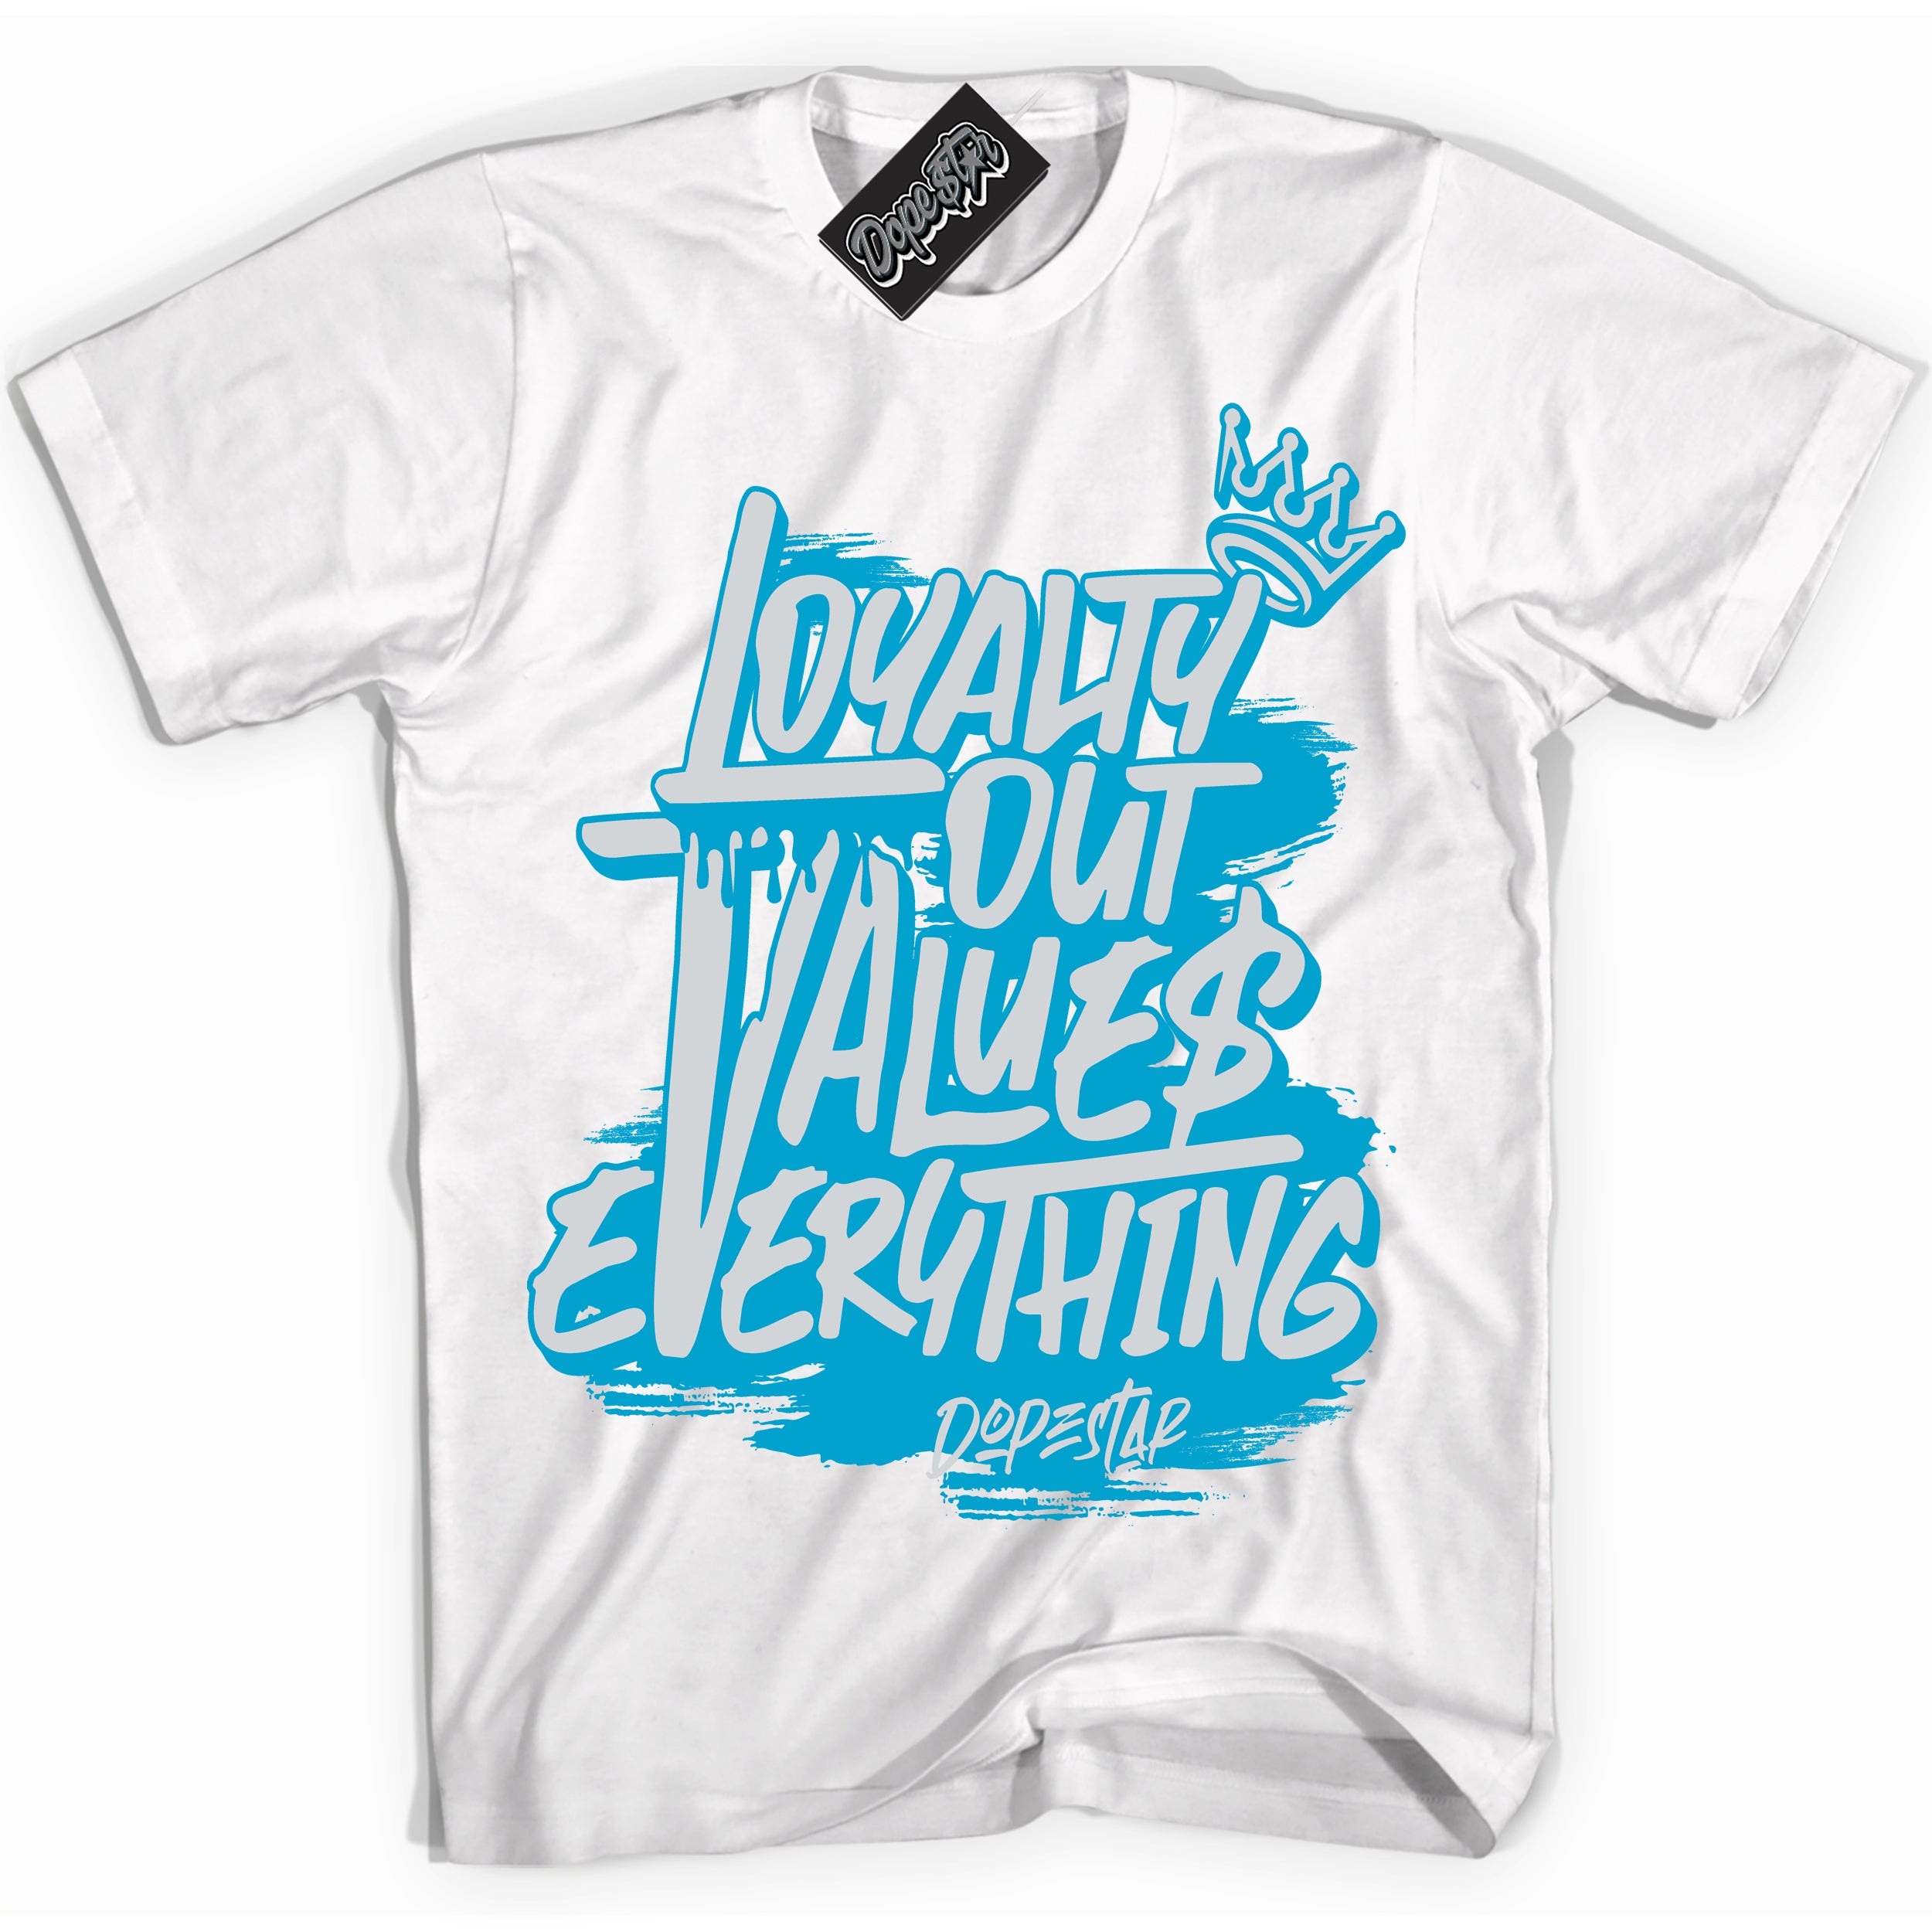 Cool White Shirt with “ Loyalty Out Values Everything” design that perfectly matches Pure Platinum Blue Lightning Sneakers.